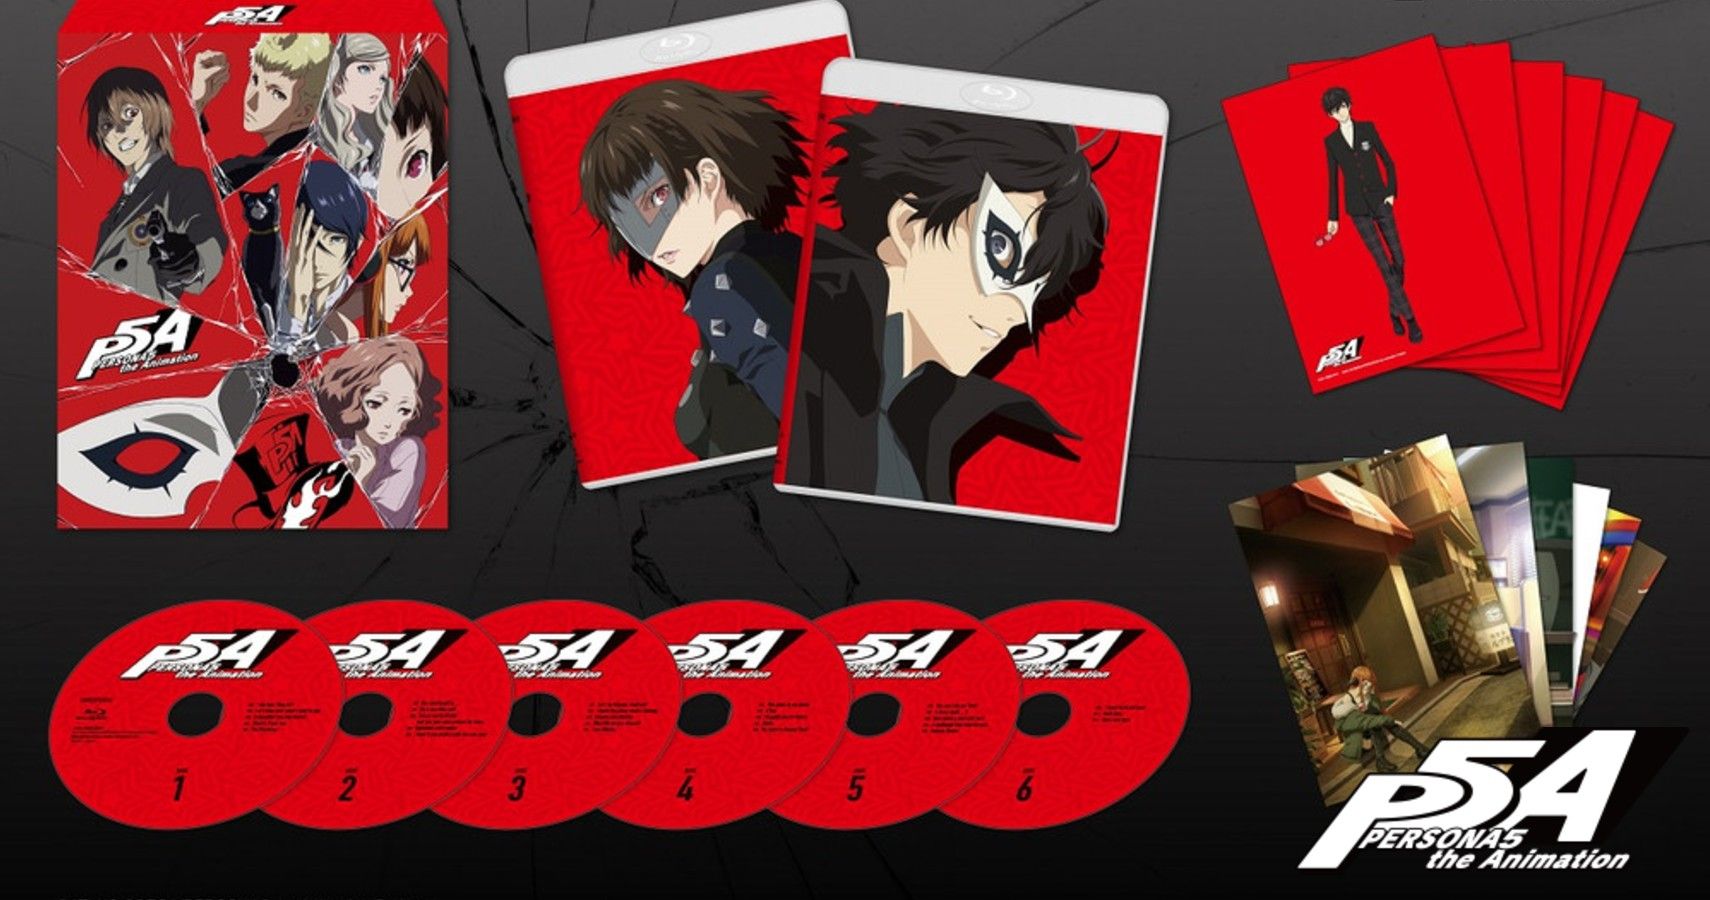 Persona 5: The Animation will be available in Complete Blue-Ray Set